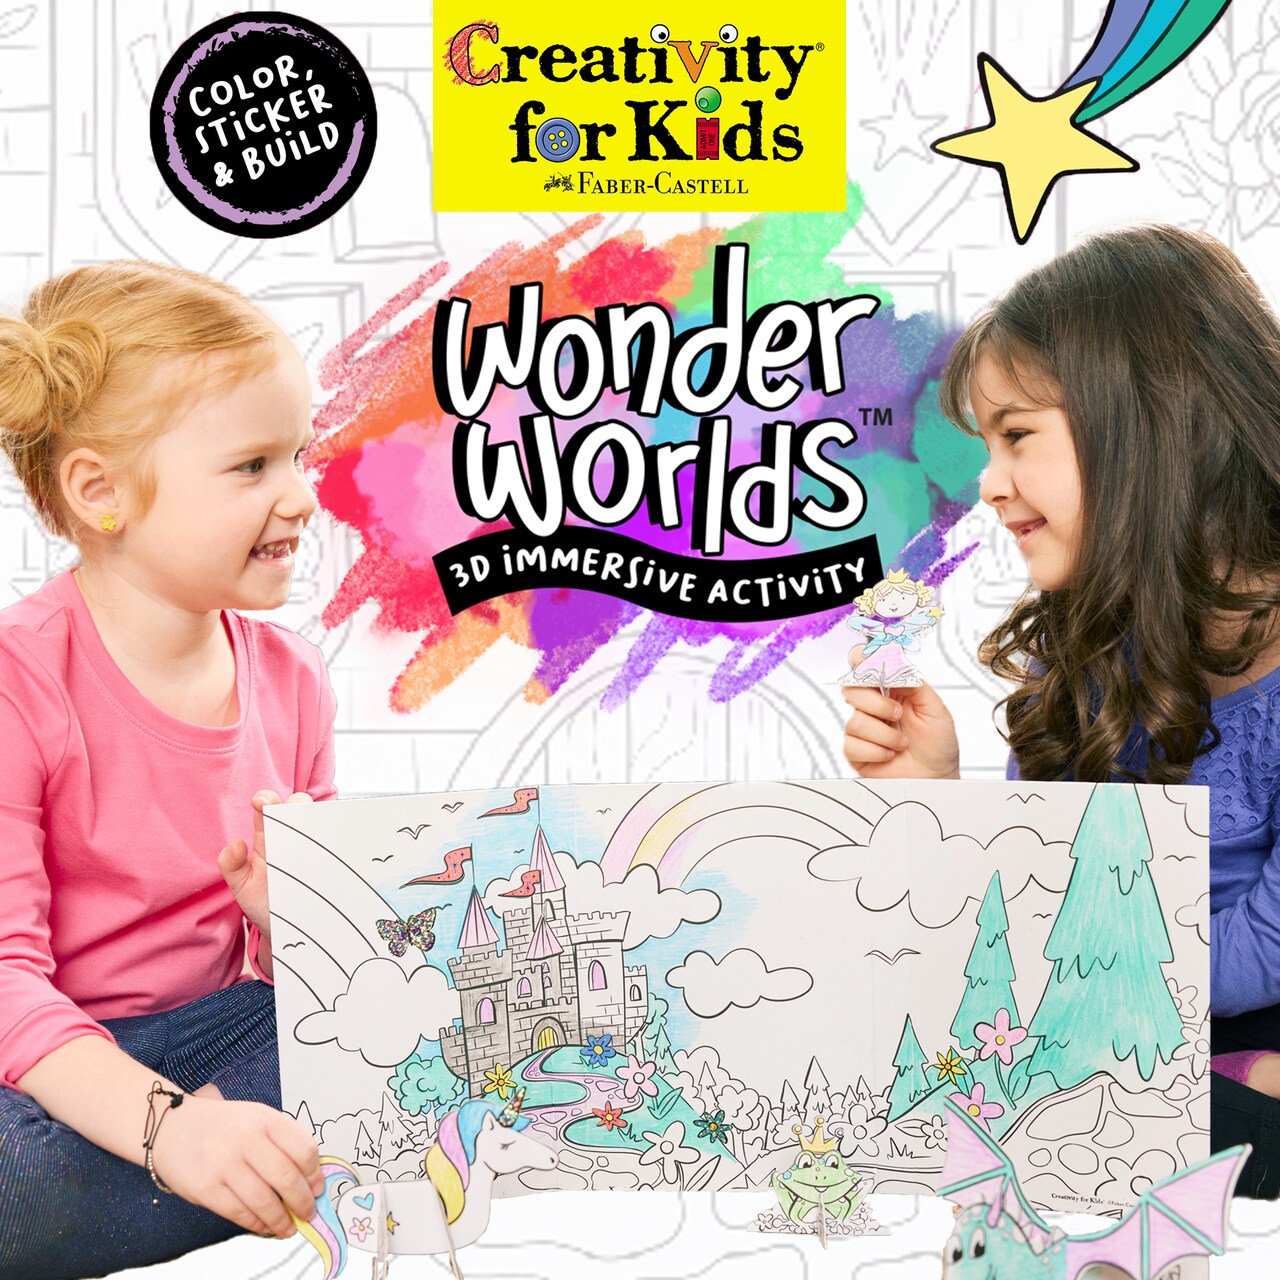 Kids Club: Color, Build & Play Wonder Worlds with Faber-Castell®